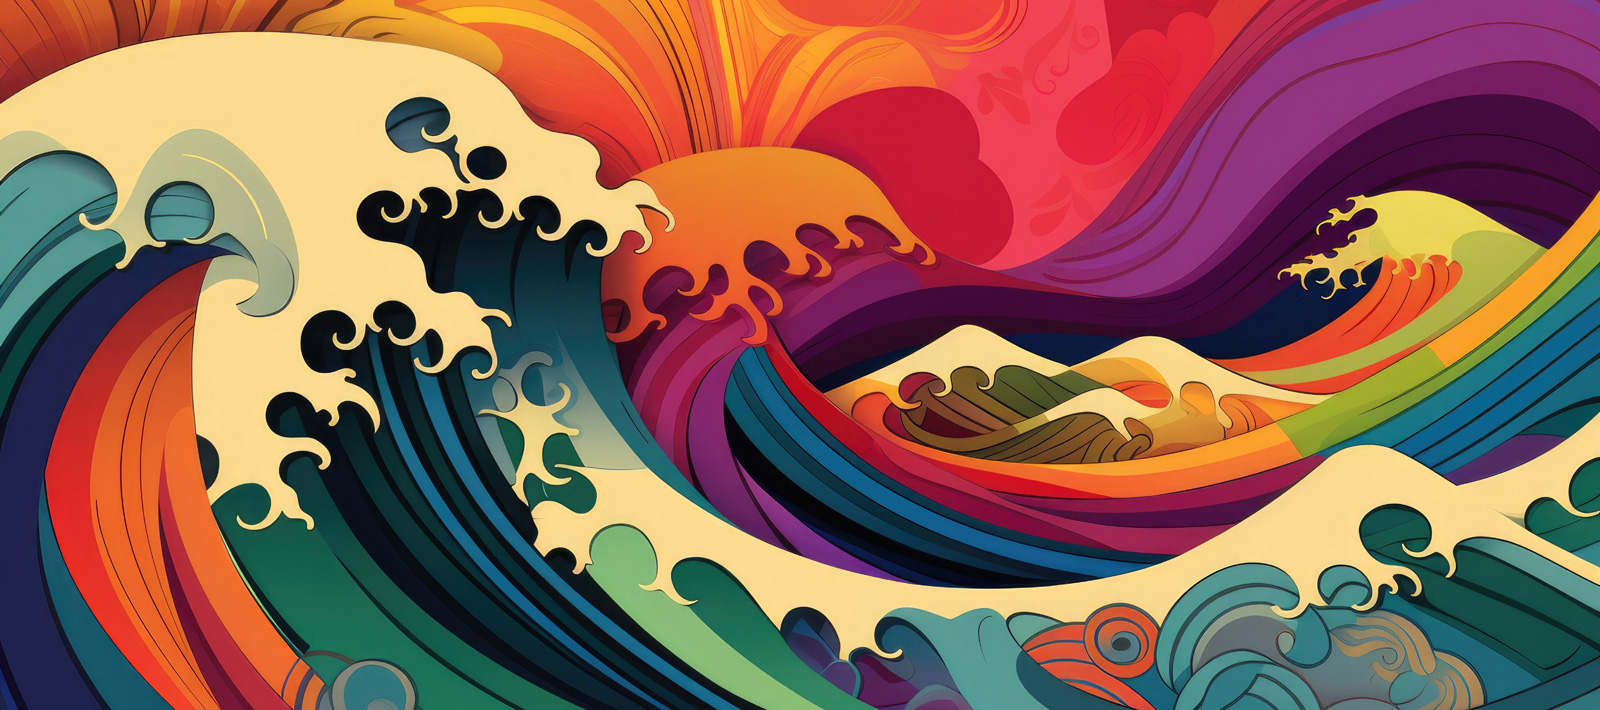 colorful waves in a style inspired by Asian art